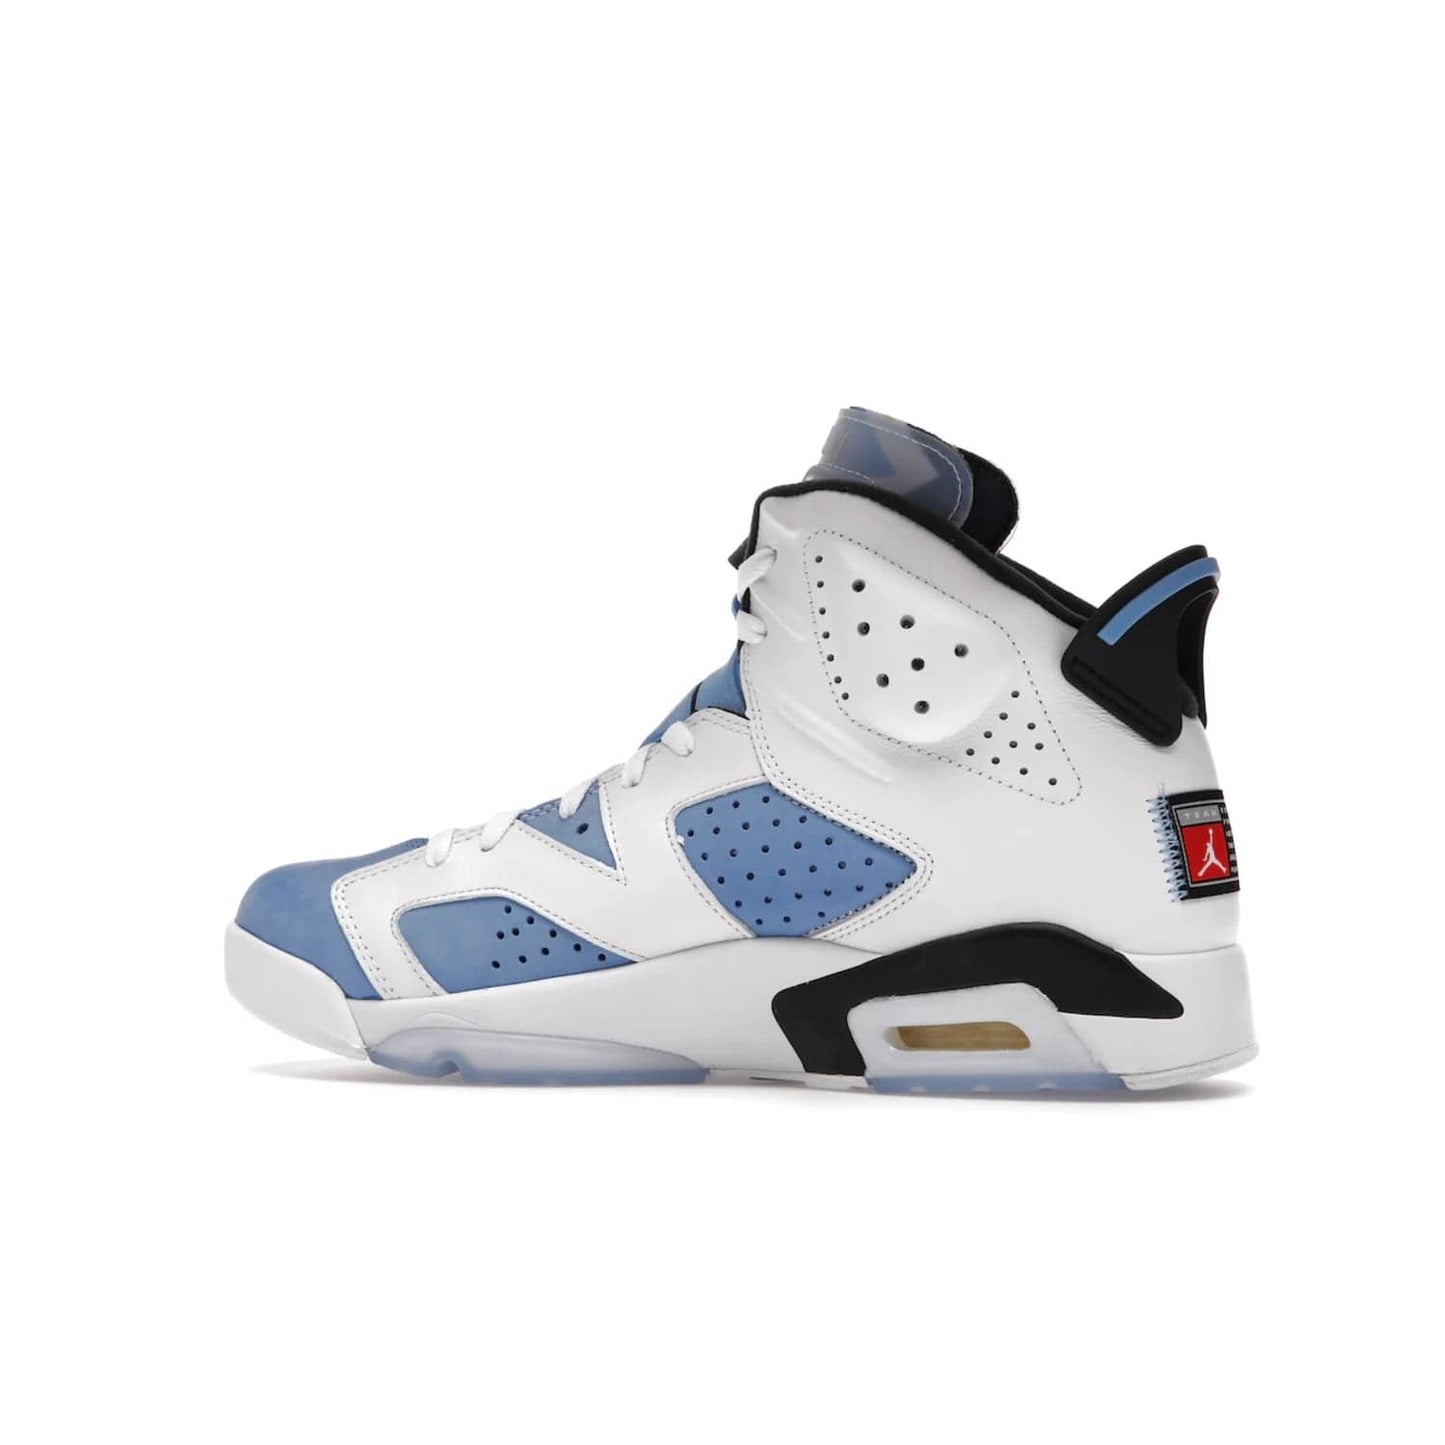 Jordan 6 Retro UNC White - Image 21 - Only at www.BallersClubKickz.com - Air Jordan 6 Retro UNC White with classic UNC colors brings nostalgia and style to a legendary silhouette. Celebrate MJ's alma mater with navy blue accents, icy semi-translucent sole and Jordan Team patch. Out March 2022 for the Sneaker Enthusiast.